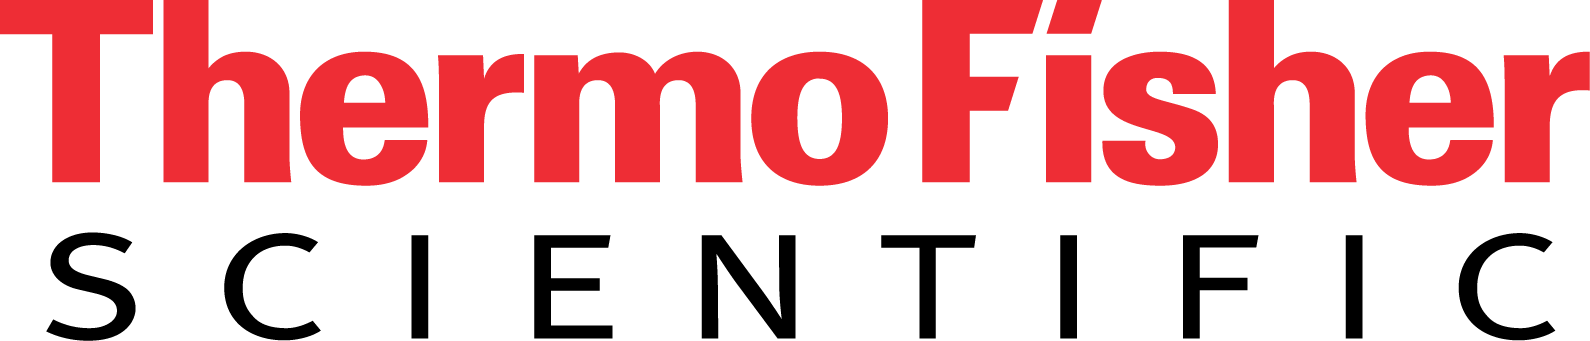 2022-07/thermofisher-logo.png